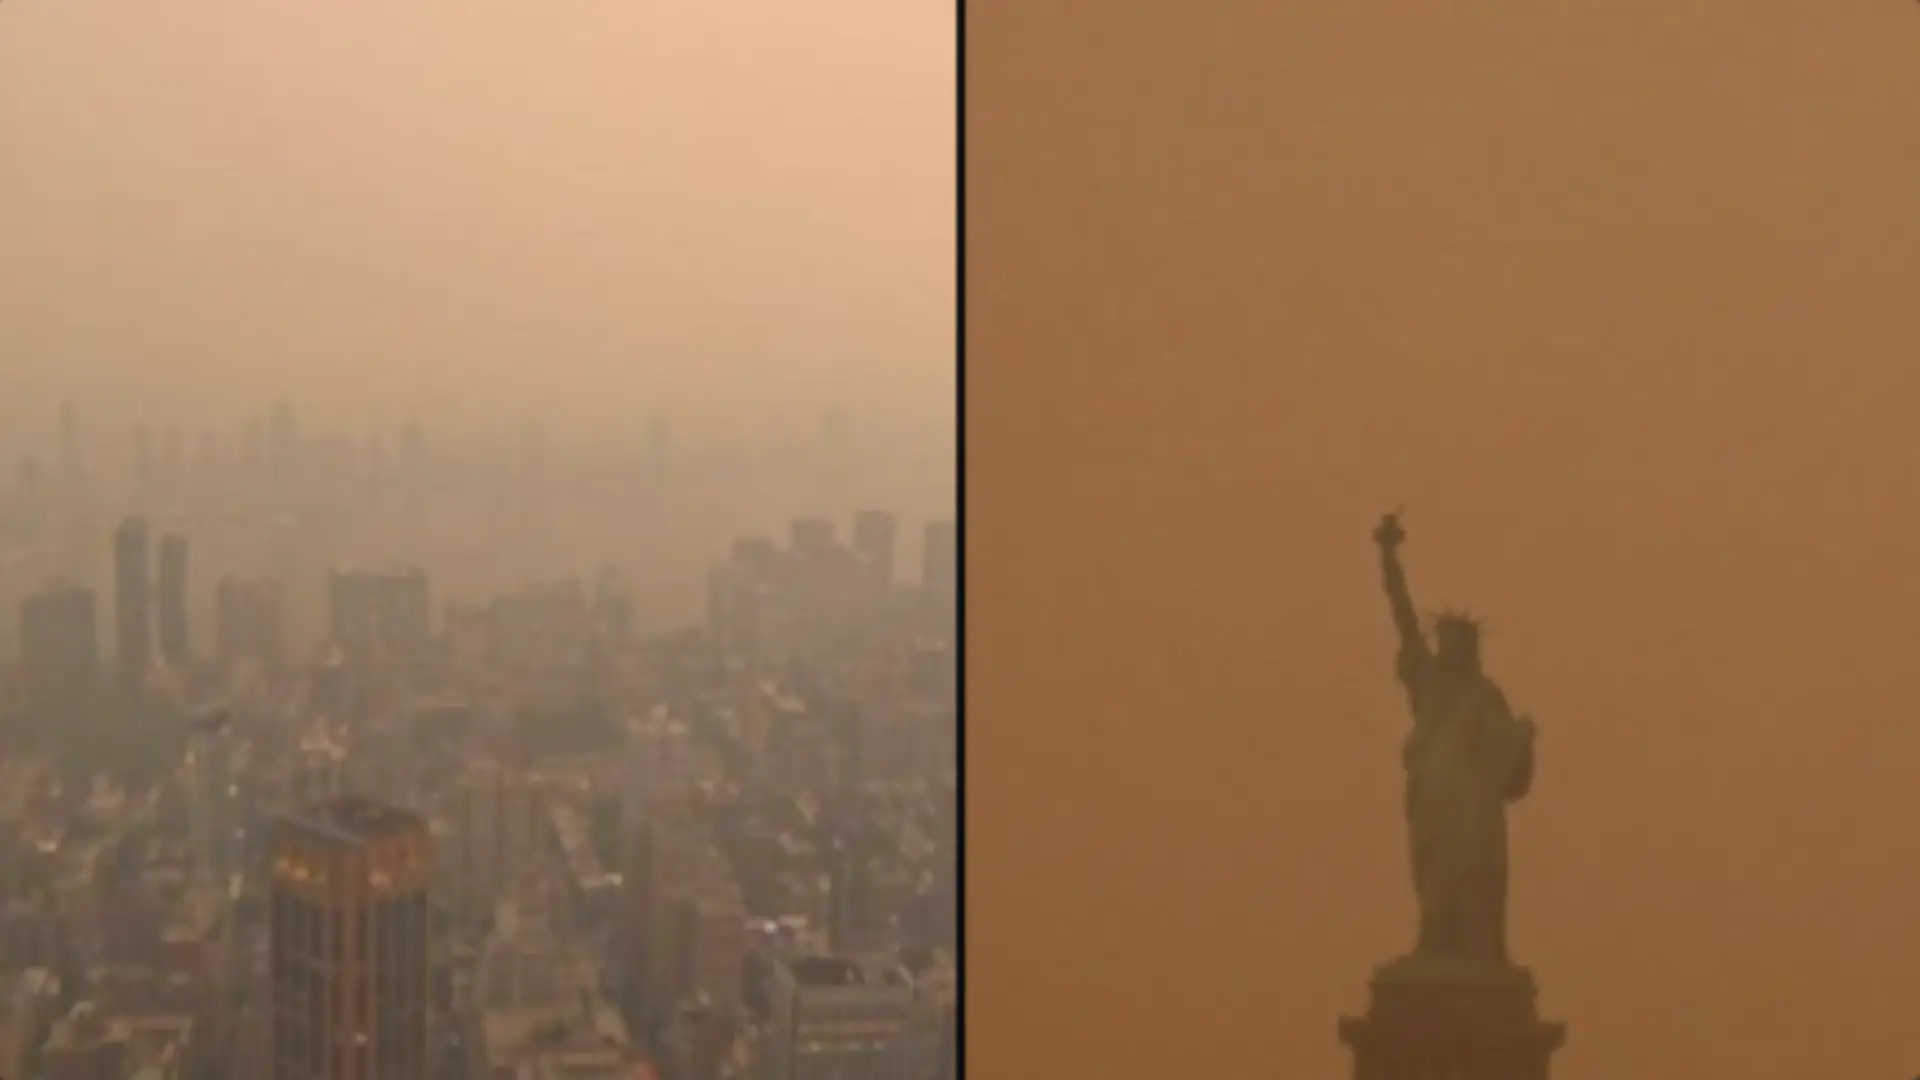 Canada Wildfire Smoke Brings New York City's Air Quality to Dangerous Levels